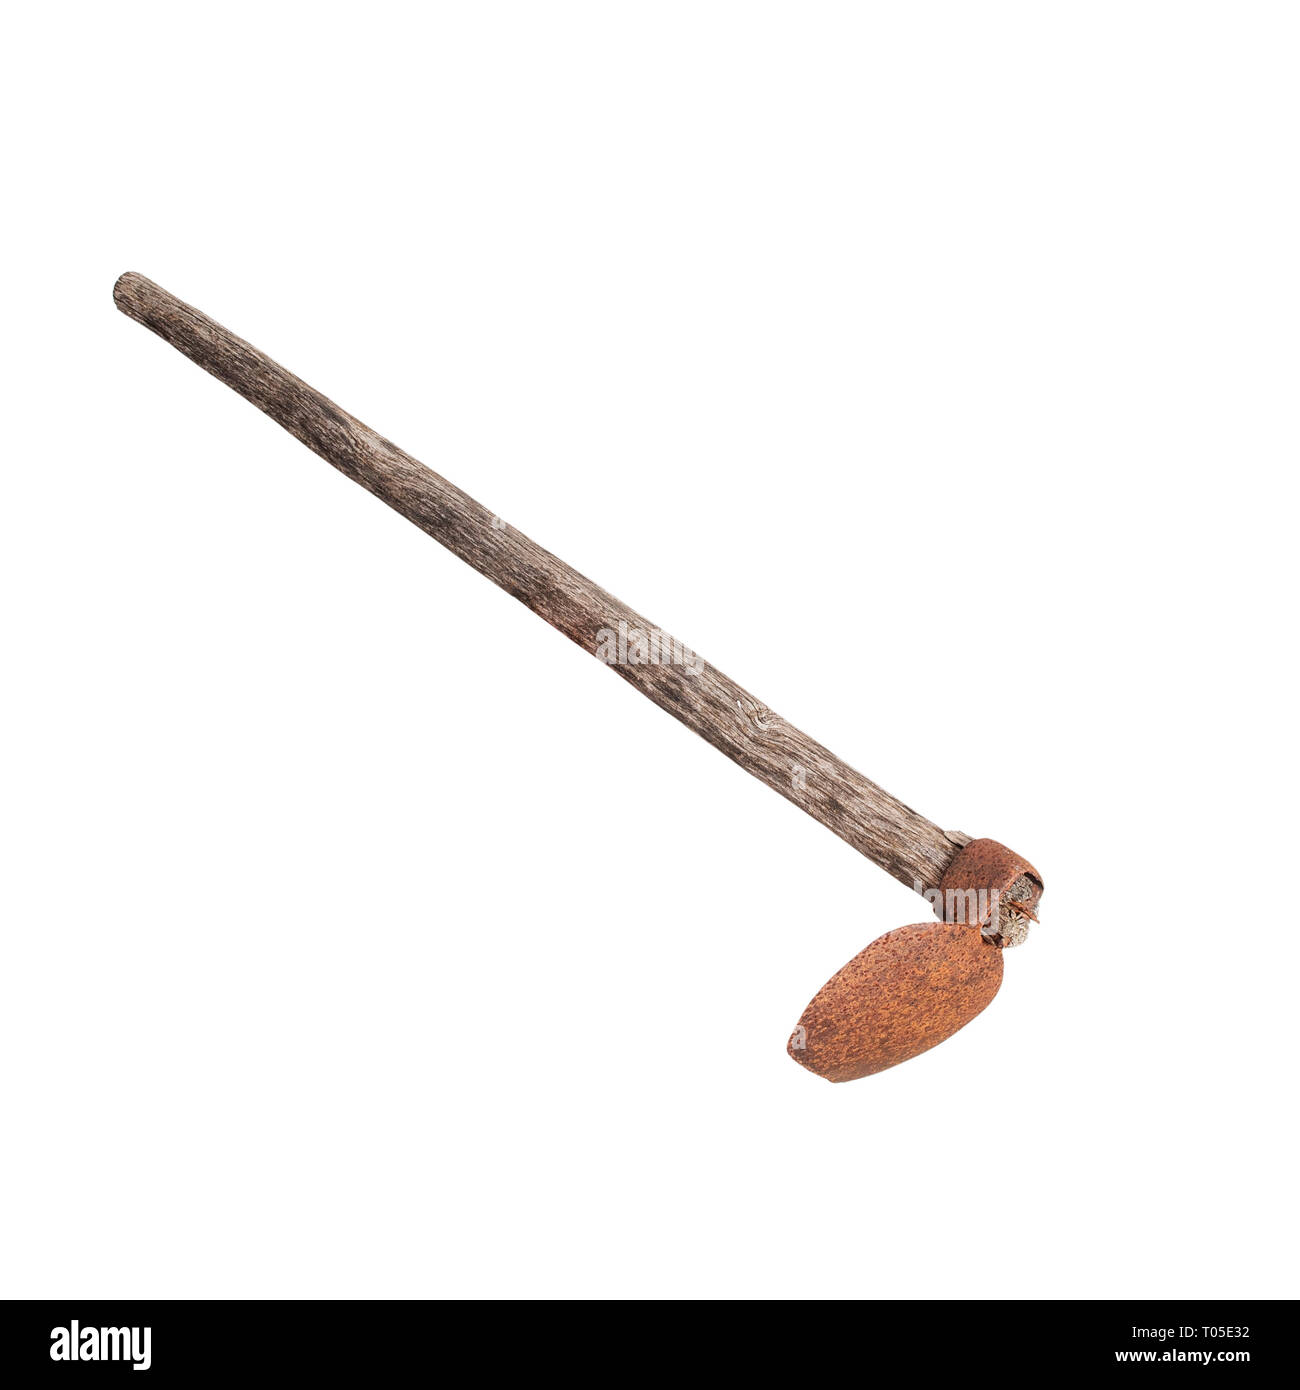 Rusty old hoe isolated on white. Vintage agricultural tool. Stock Photo